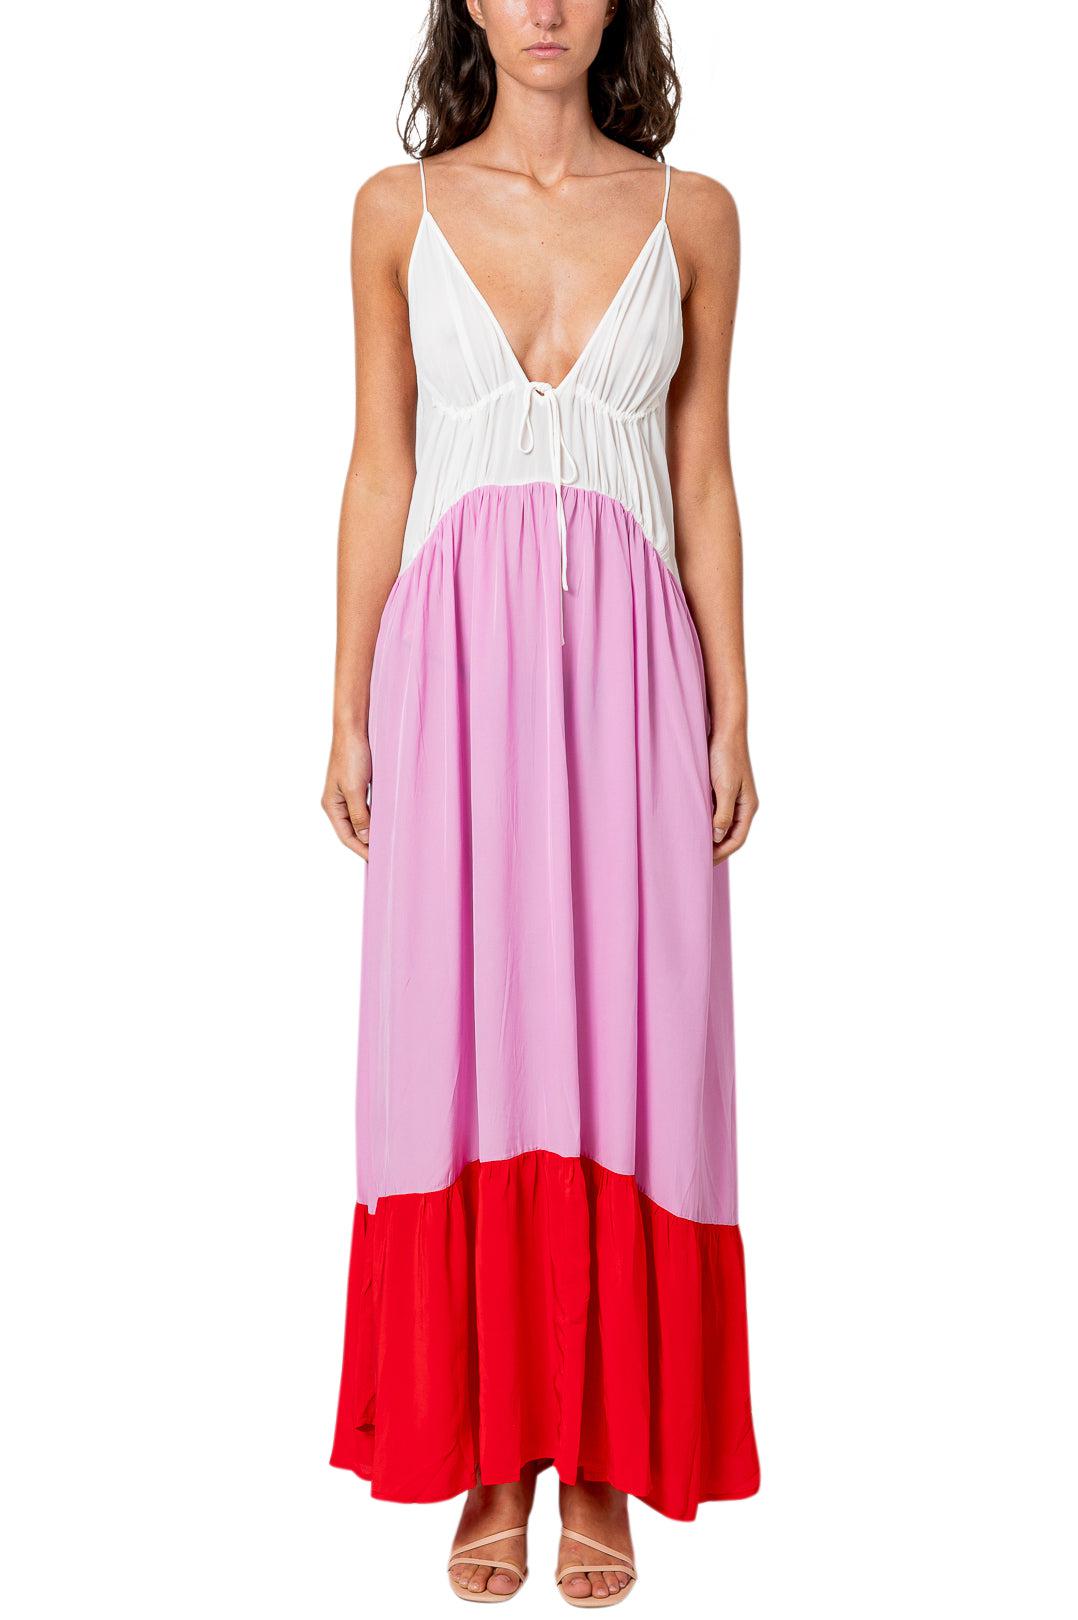 Evarae-Rouched Long Dress-dgallerystore